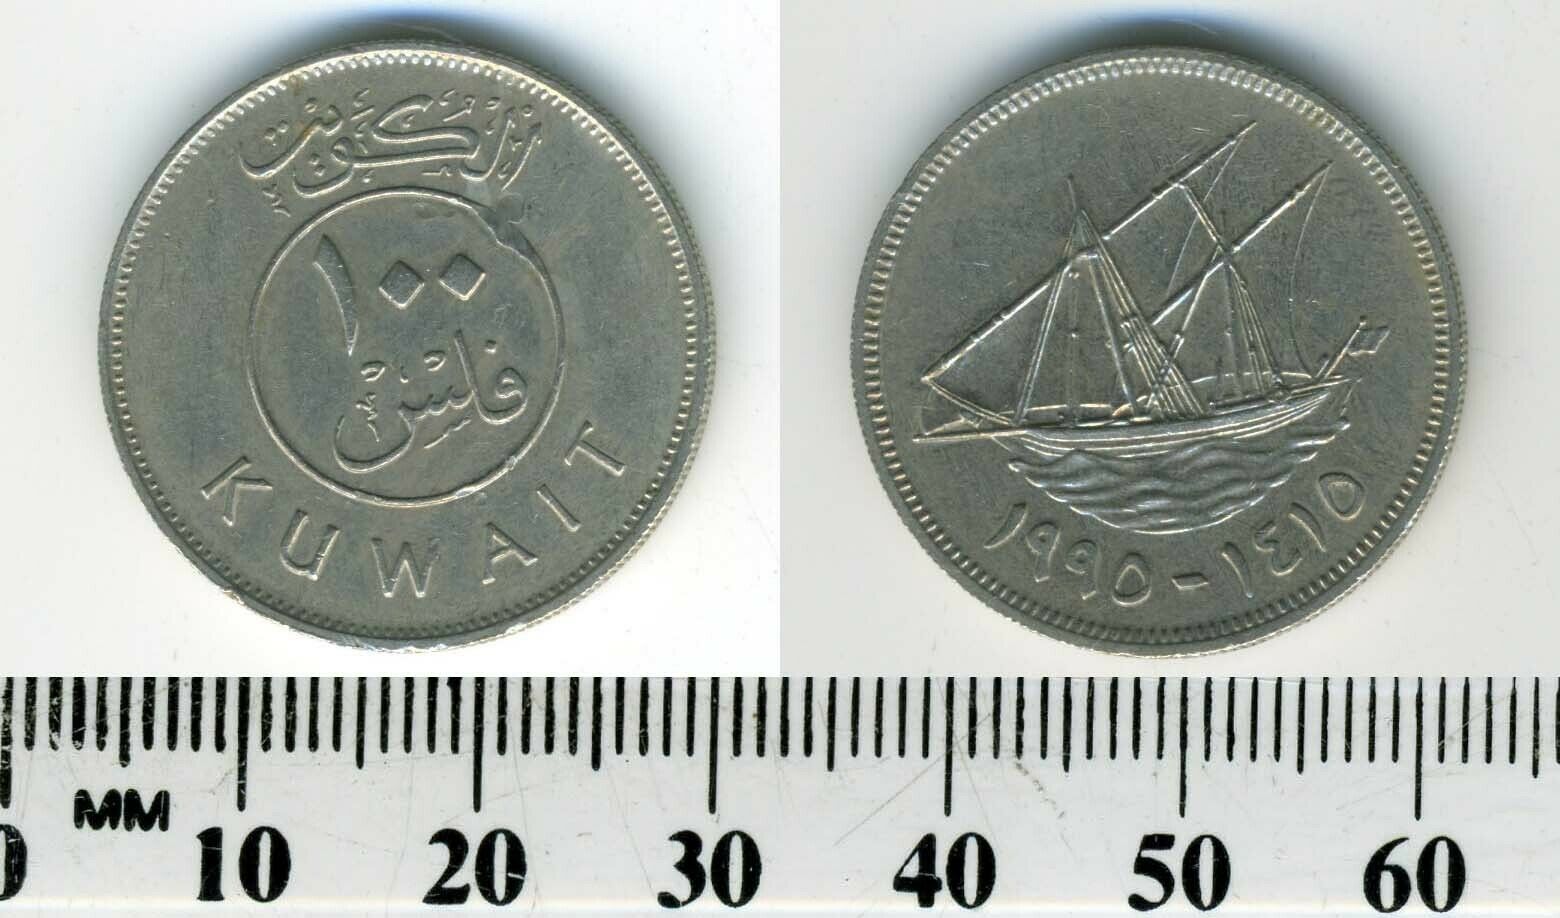 Kuwait 1995 (1415) - 100 Fils Copper-nickel Coin - Dhow With Sails